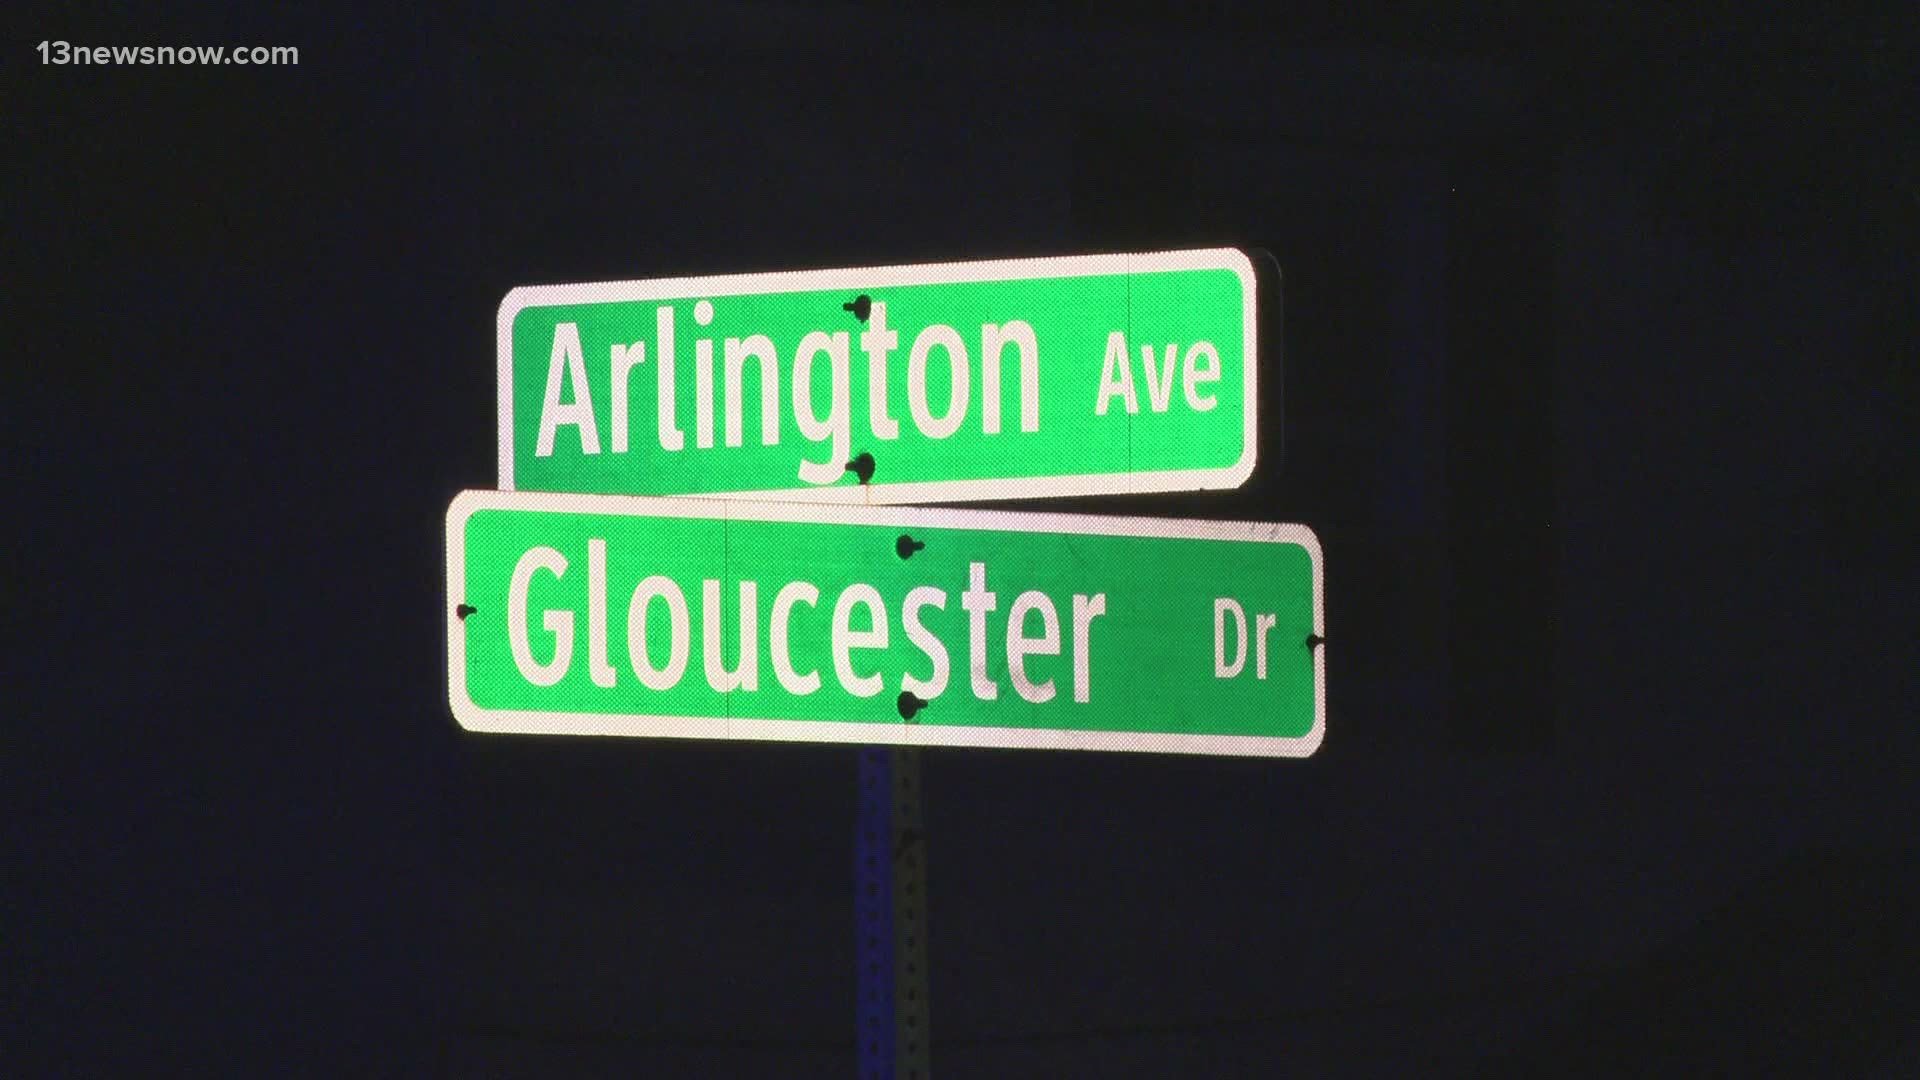 A male was found dead inside a vehicle in the 5600 block of Arlington Avenue late Tuesday night.